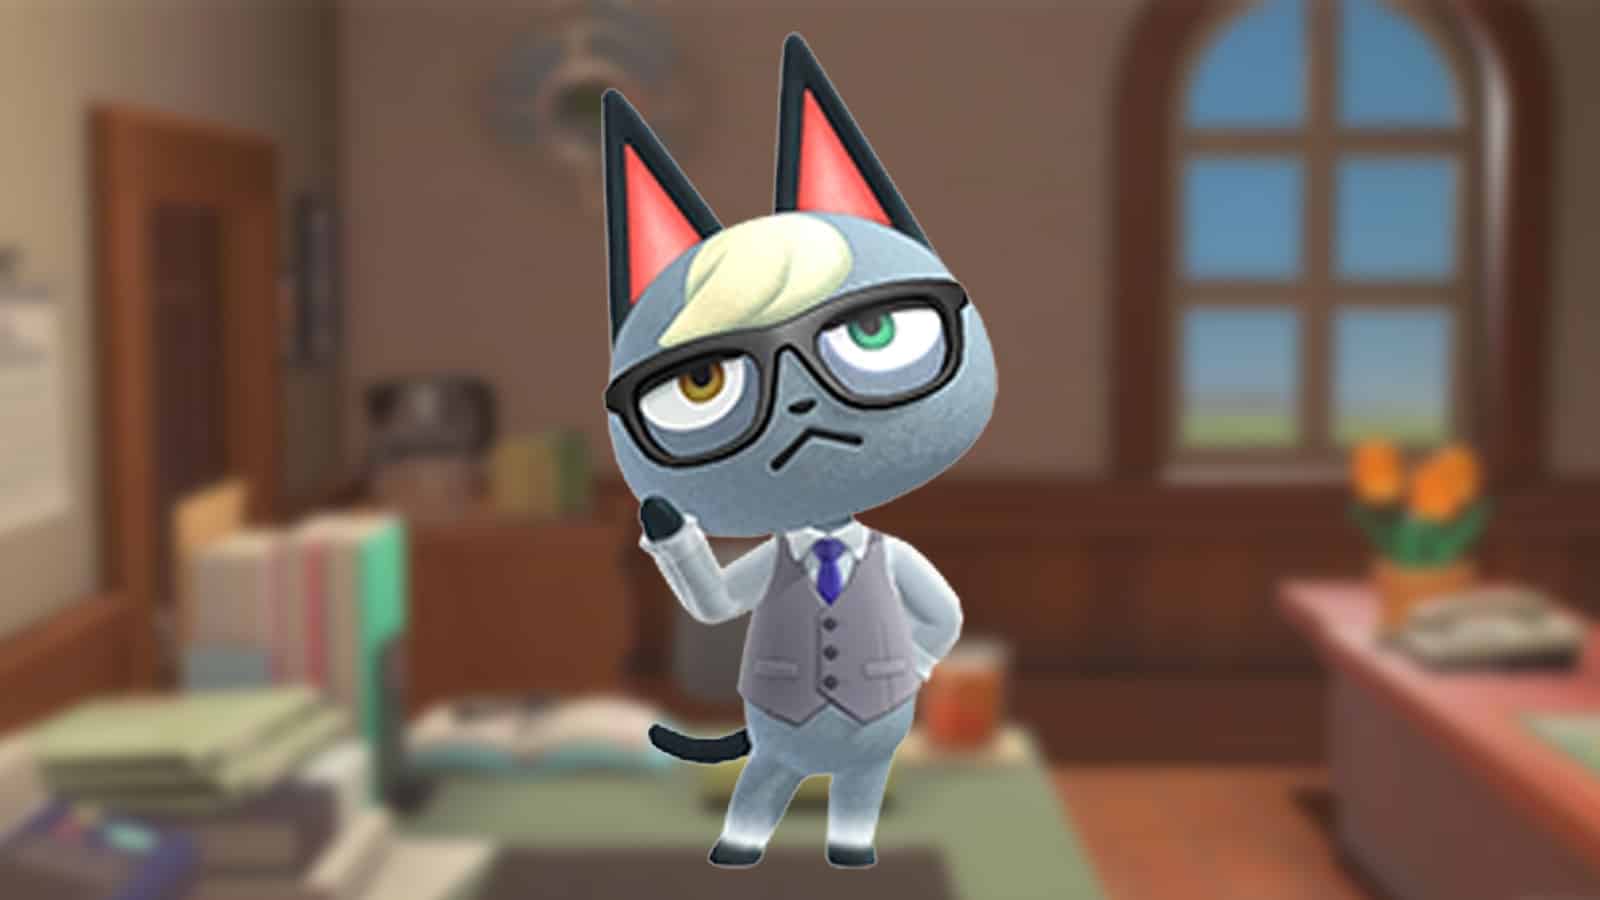 Raymond appearing in Animal Crossing New Horizons